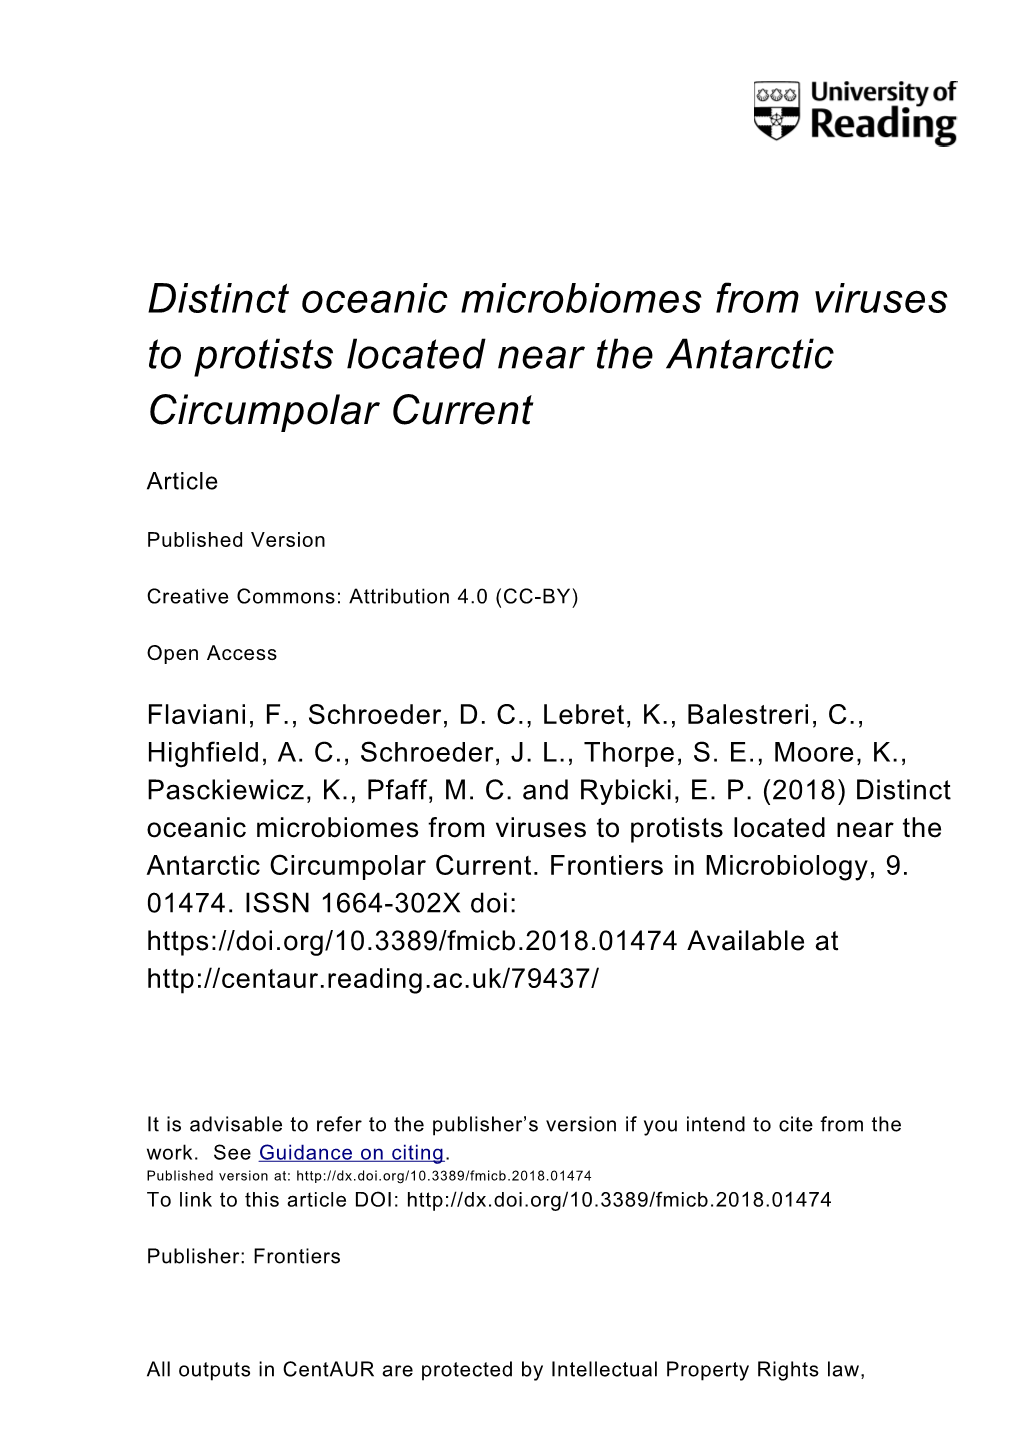 Distinct Oceanic Microbiomes from Viruses to Protists Located Near the Antarctic Circumpolar Current